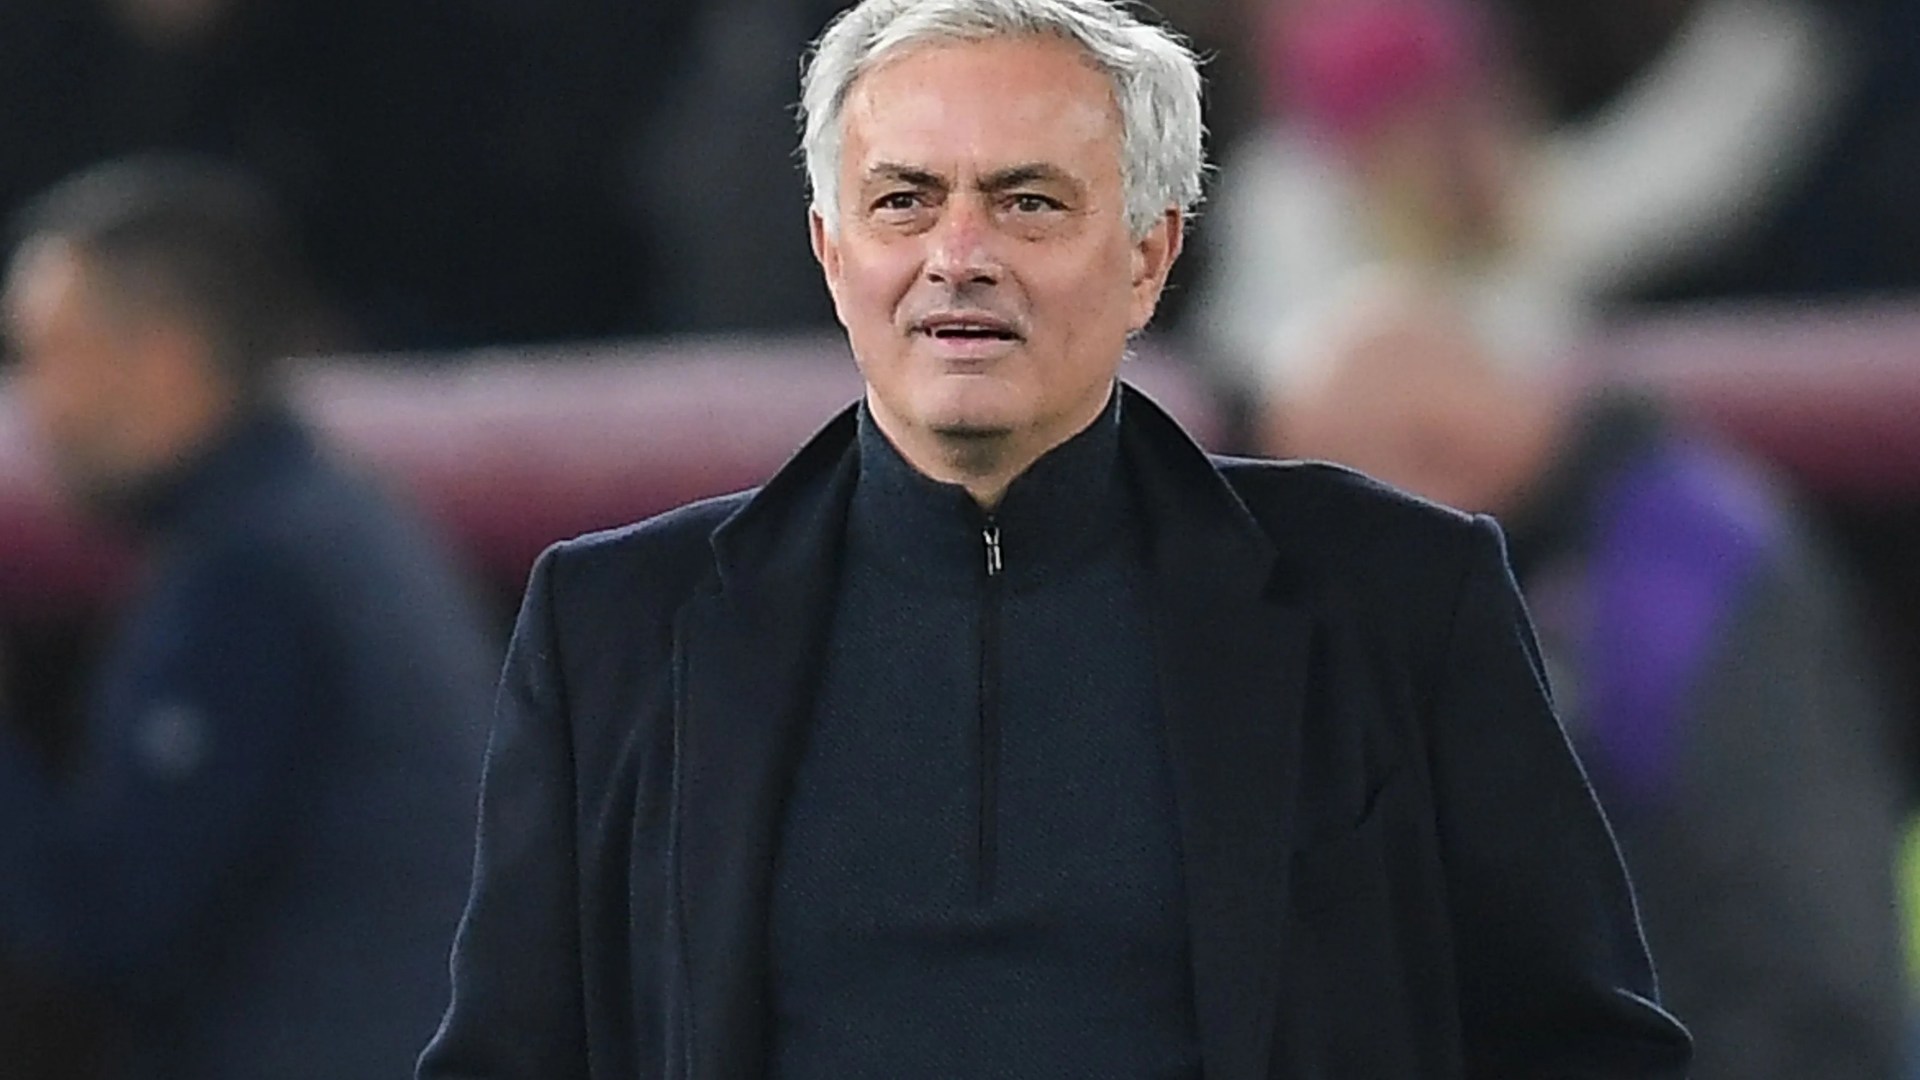 Newcastle 'interested in Jose Mourinho as manager' as fans say 'sincerely hope not'